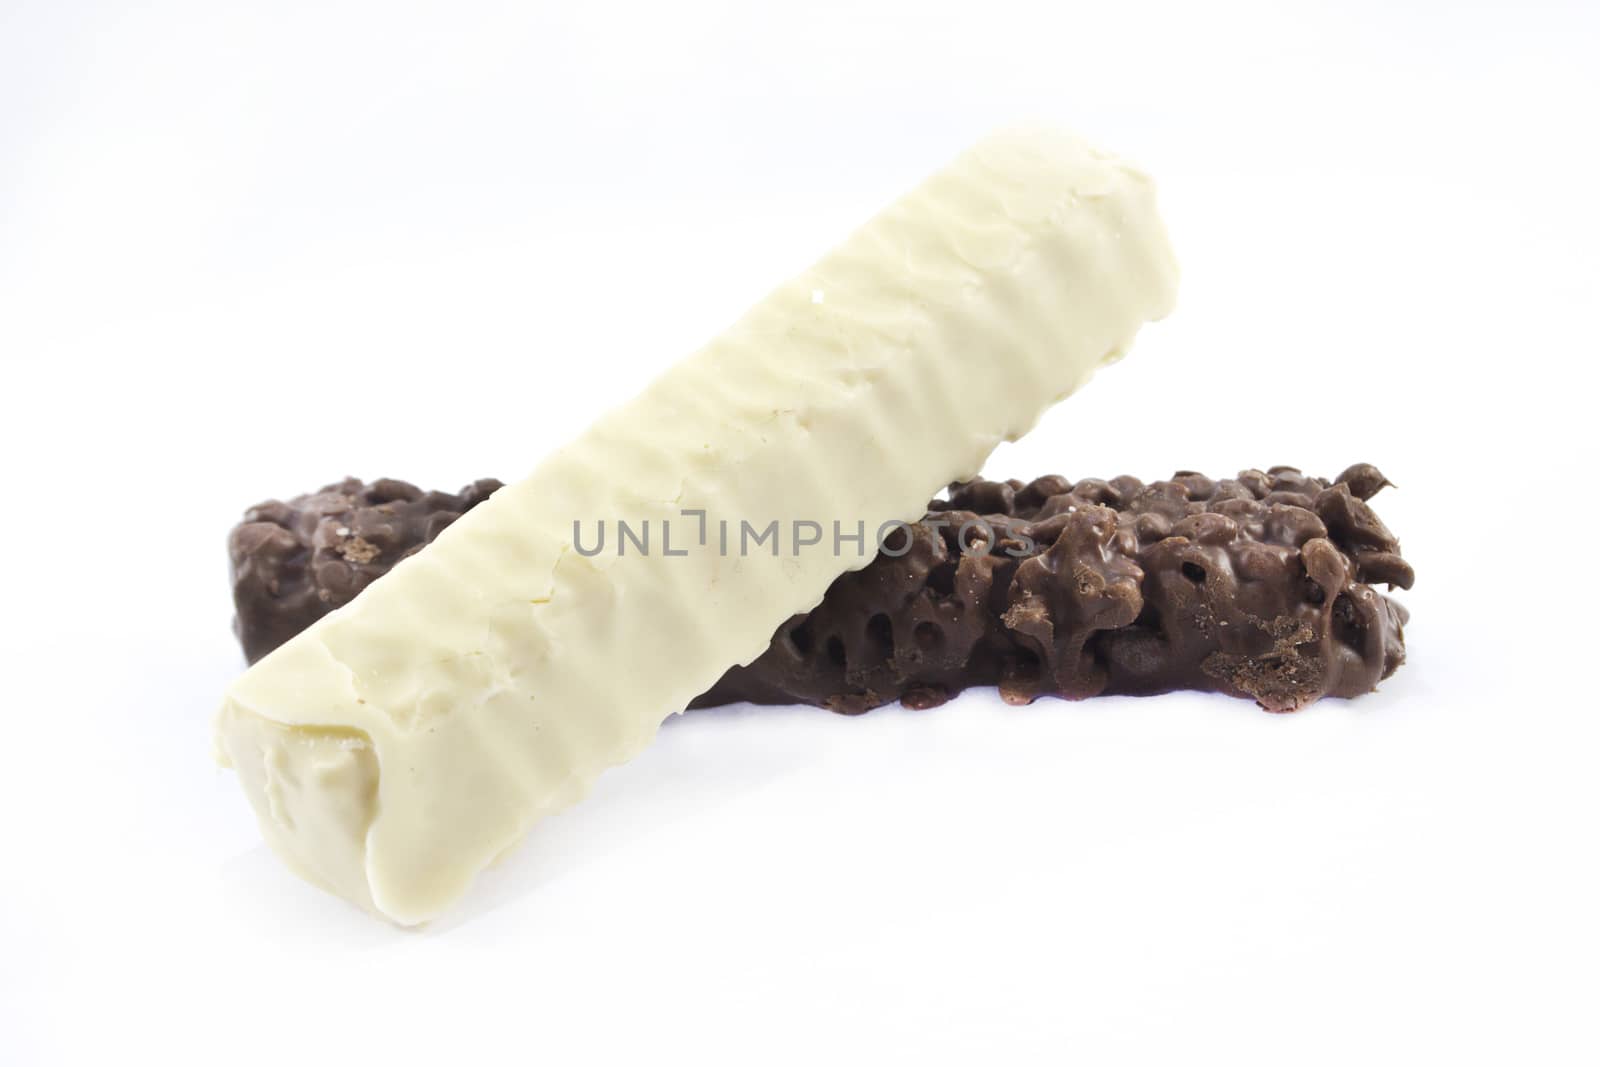 White chocolate bar with filling, on White background.